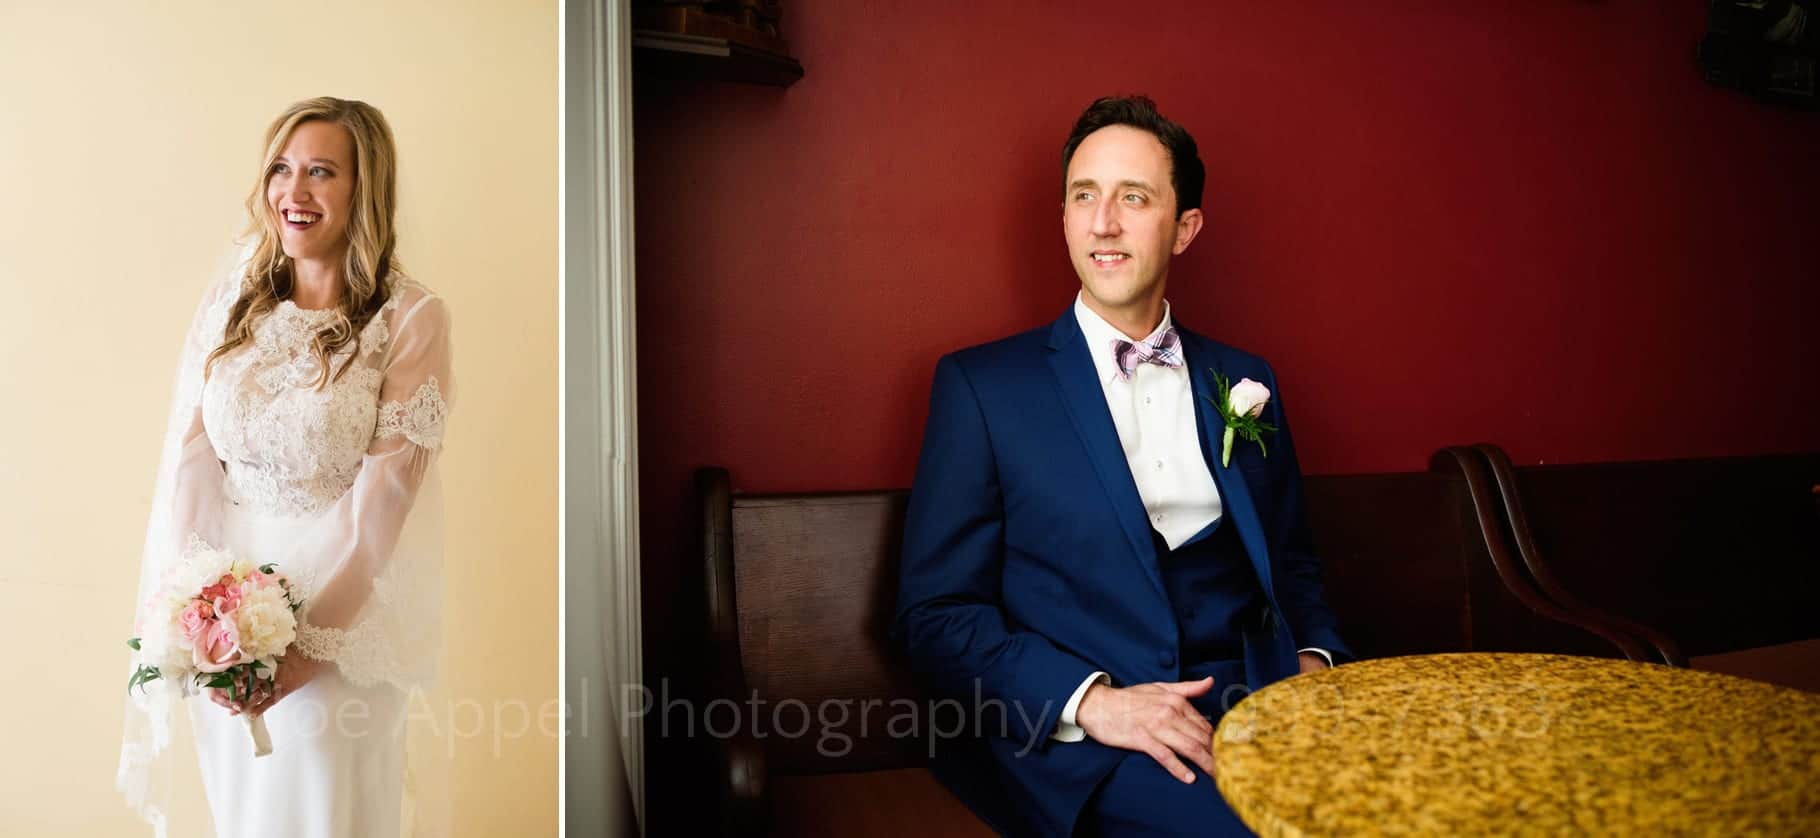 Two portraits. A long-haired blonde bride looks left and smiles as she stands against a brightly lit wall. The groom in a blue suit with a pink rose pinned to his collar sits in a booth with a dark red wall behind him.